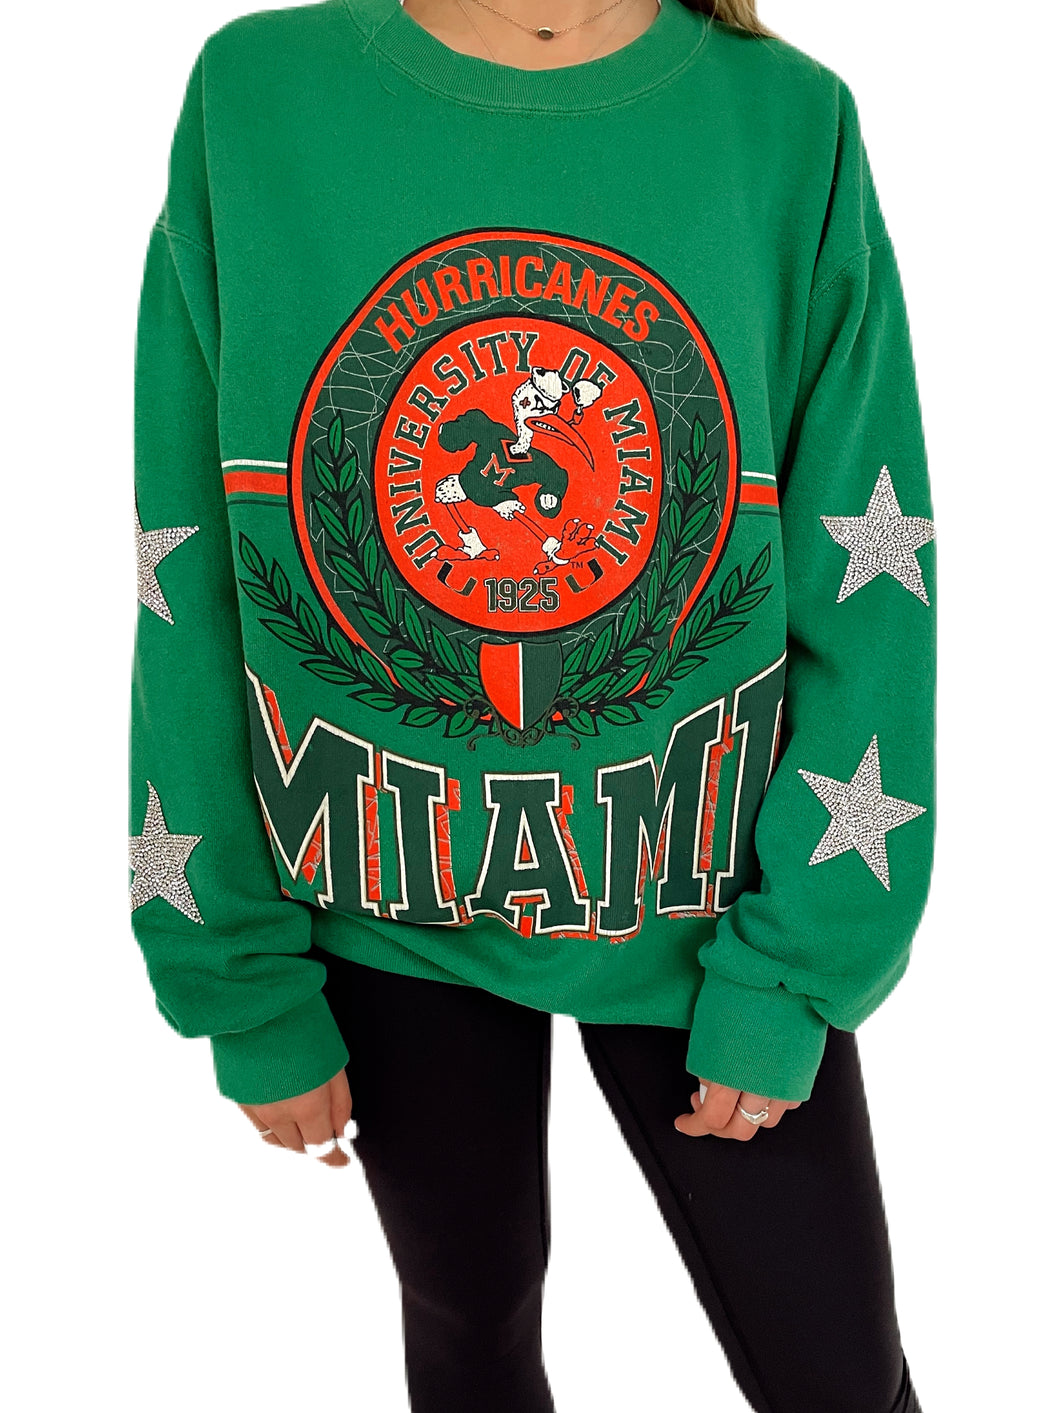 University of Miami, One of a KIND Vintage UM Hurricanes Sweatshirt with Crystal Star Design